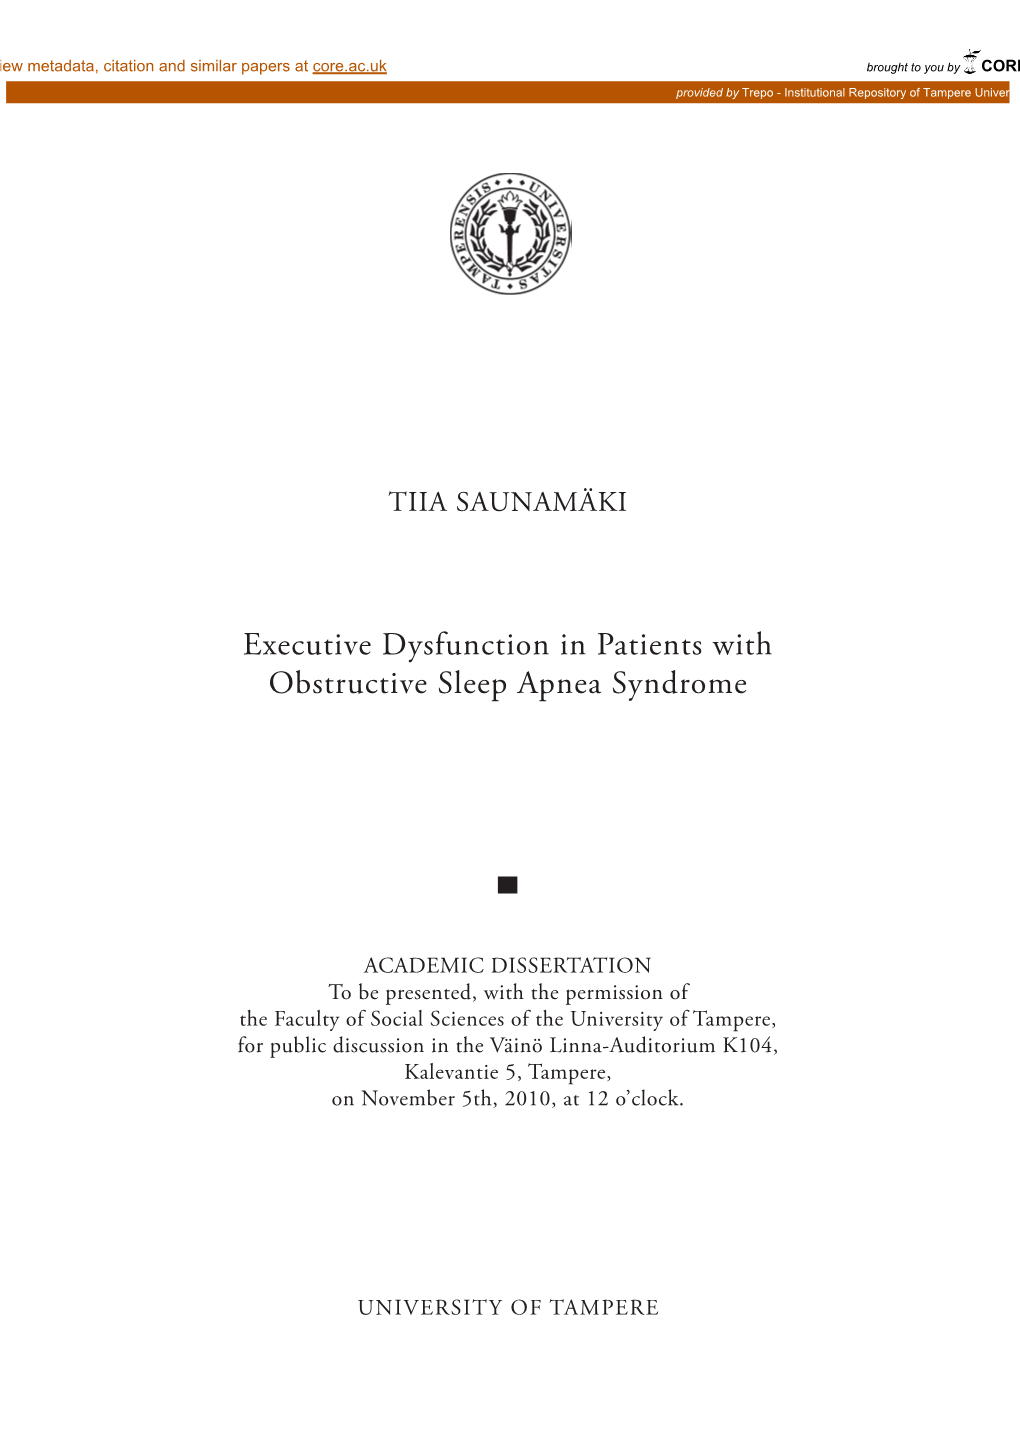 Executive Dysfunction in Patients with Obstructive Sleep Apnea Syndrome